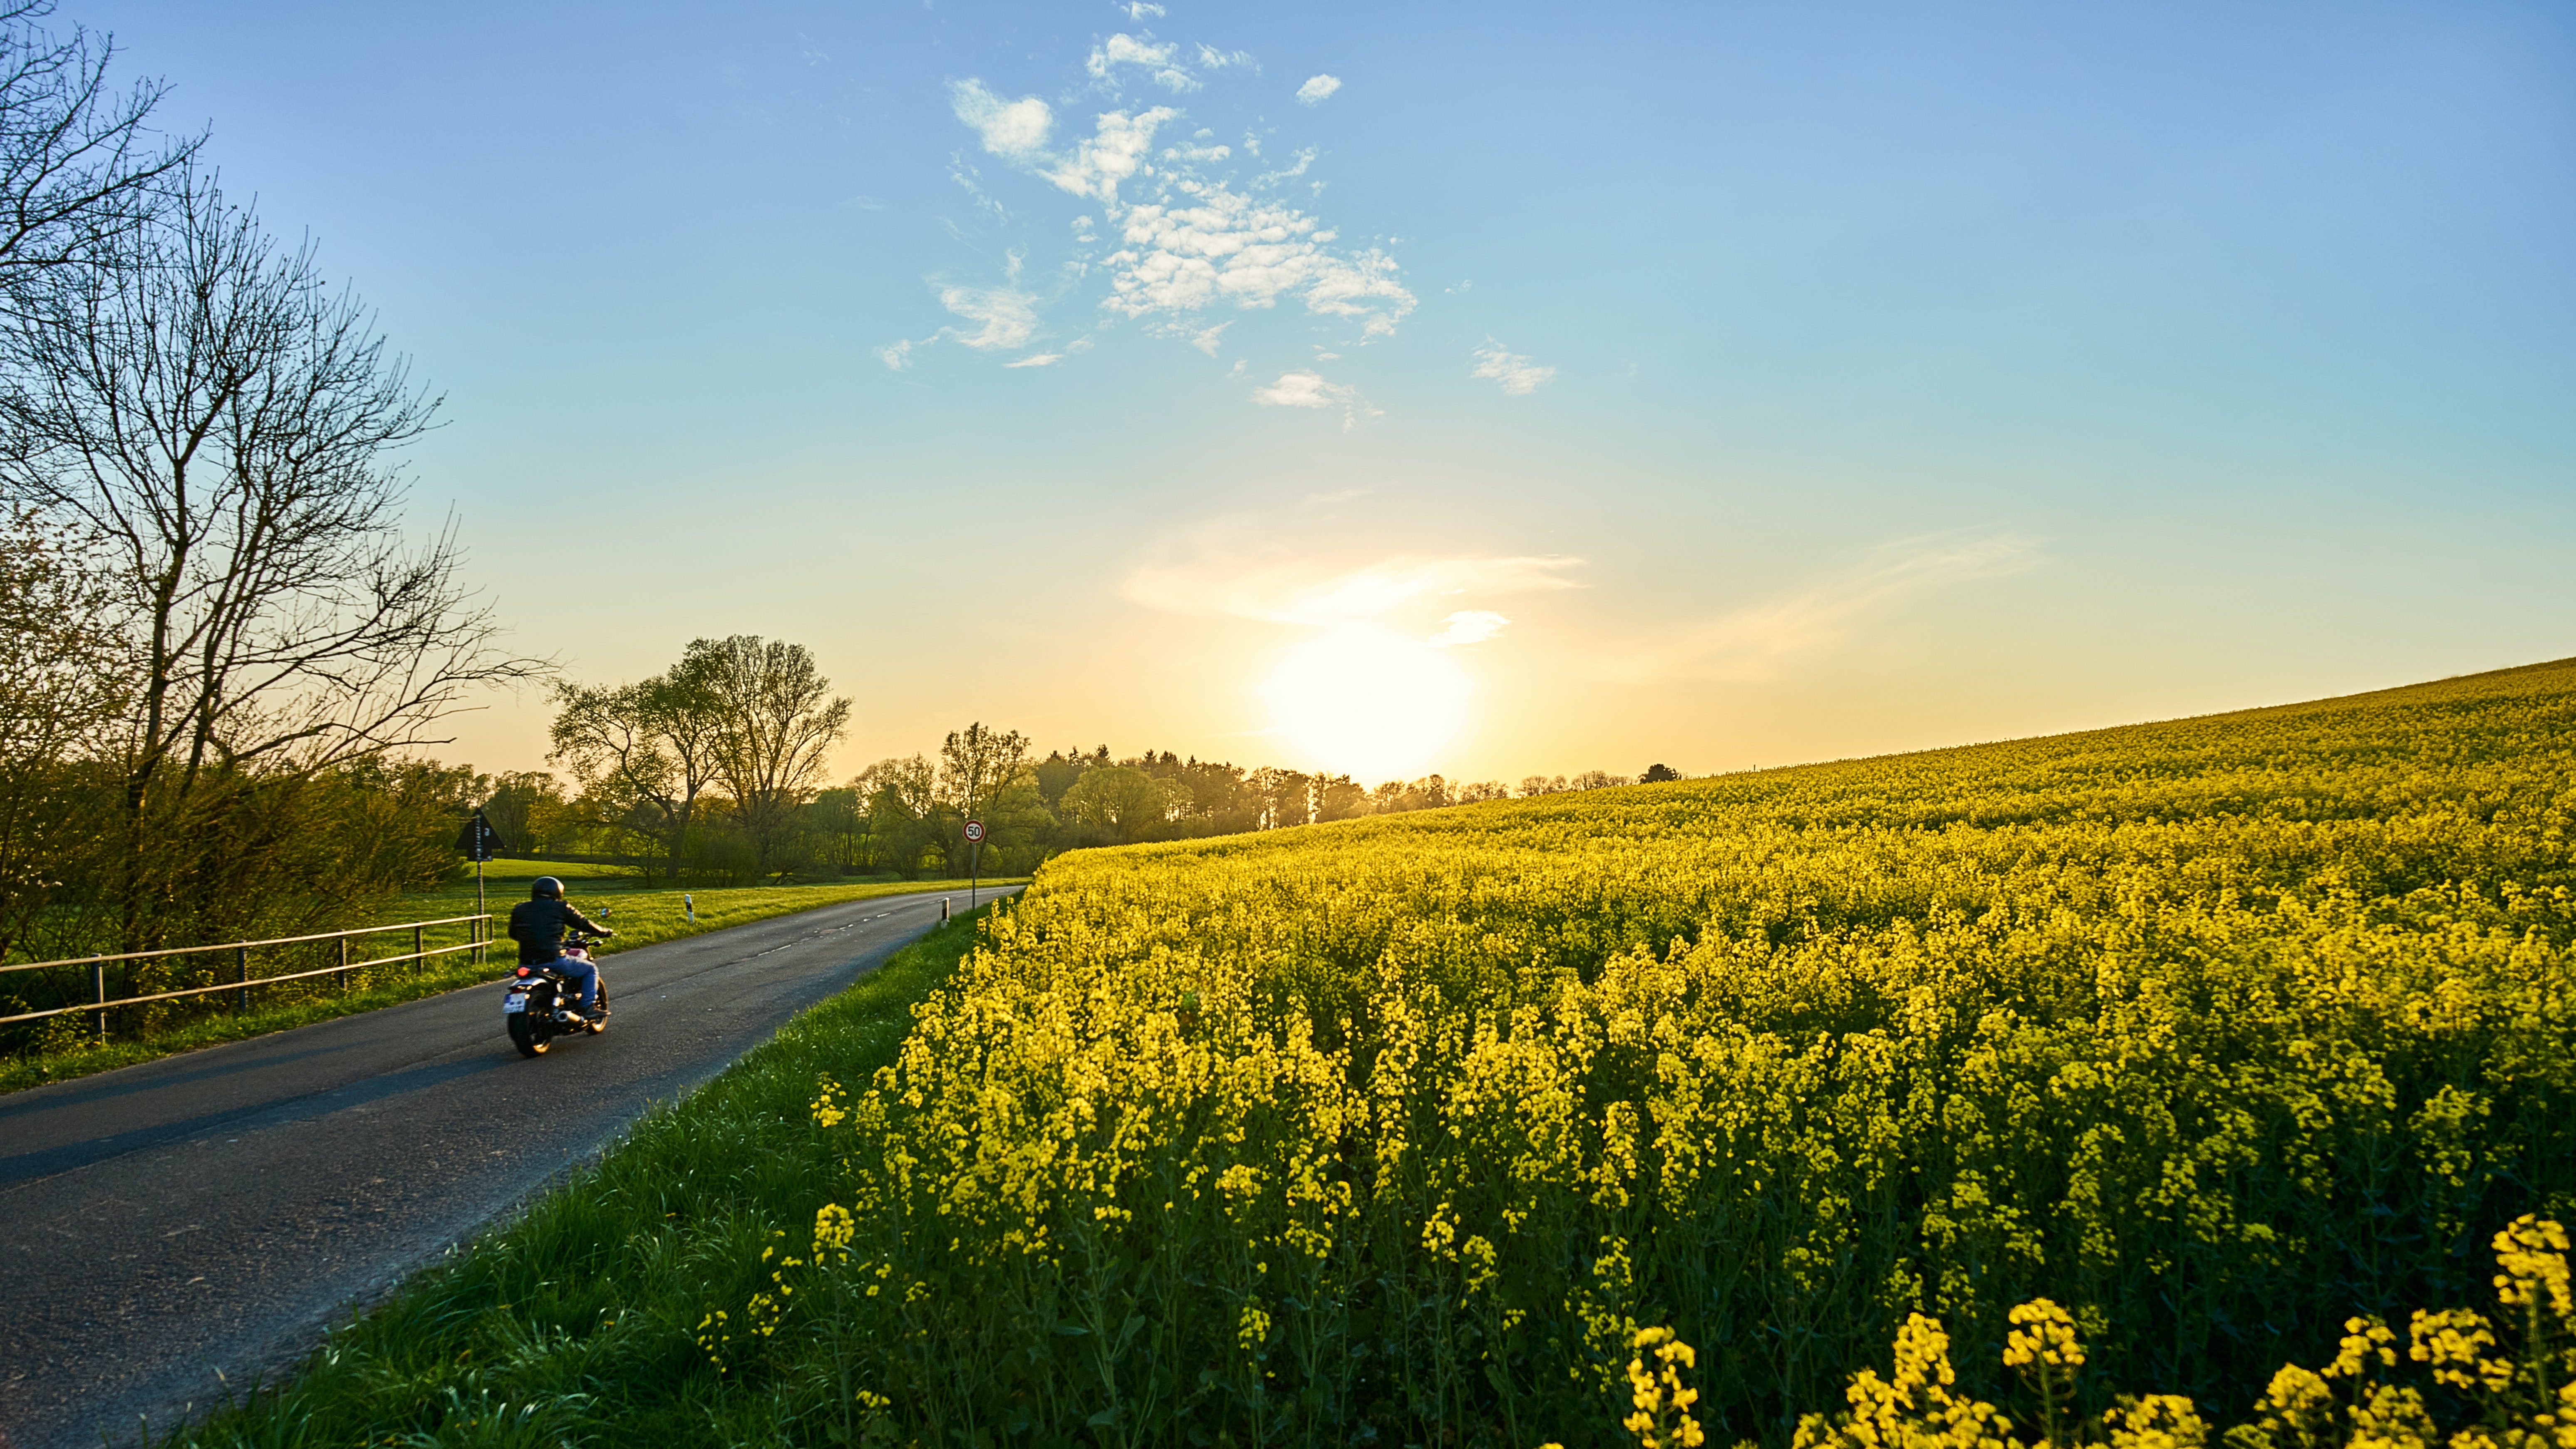 motorcycle rider on a dirt road at sunset